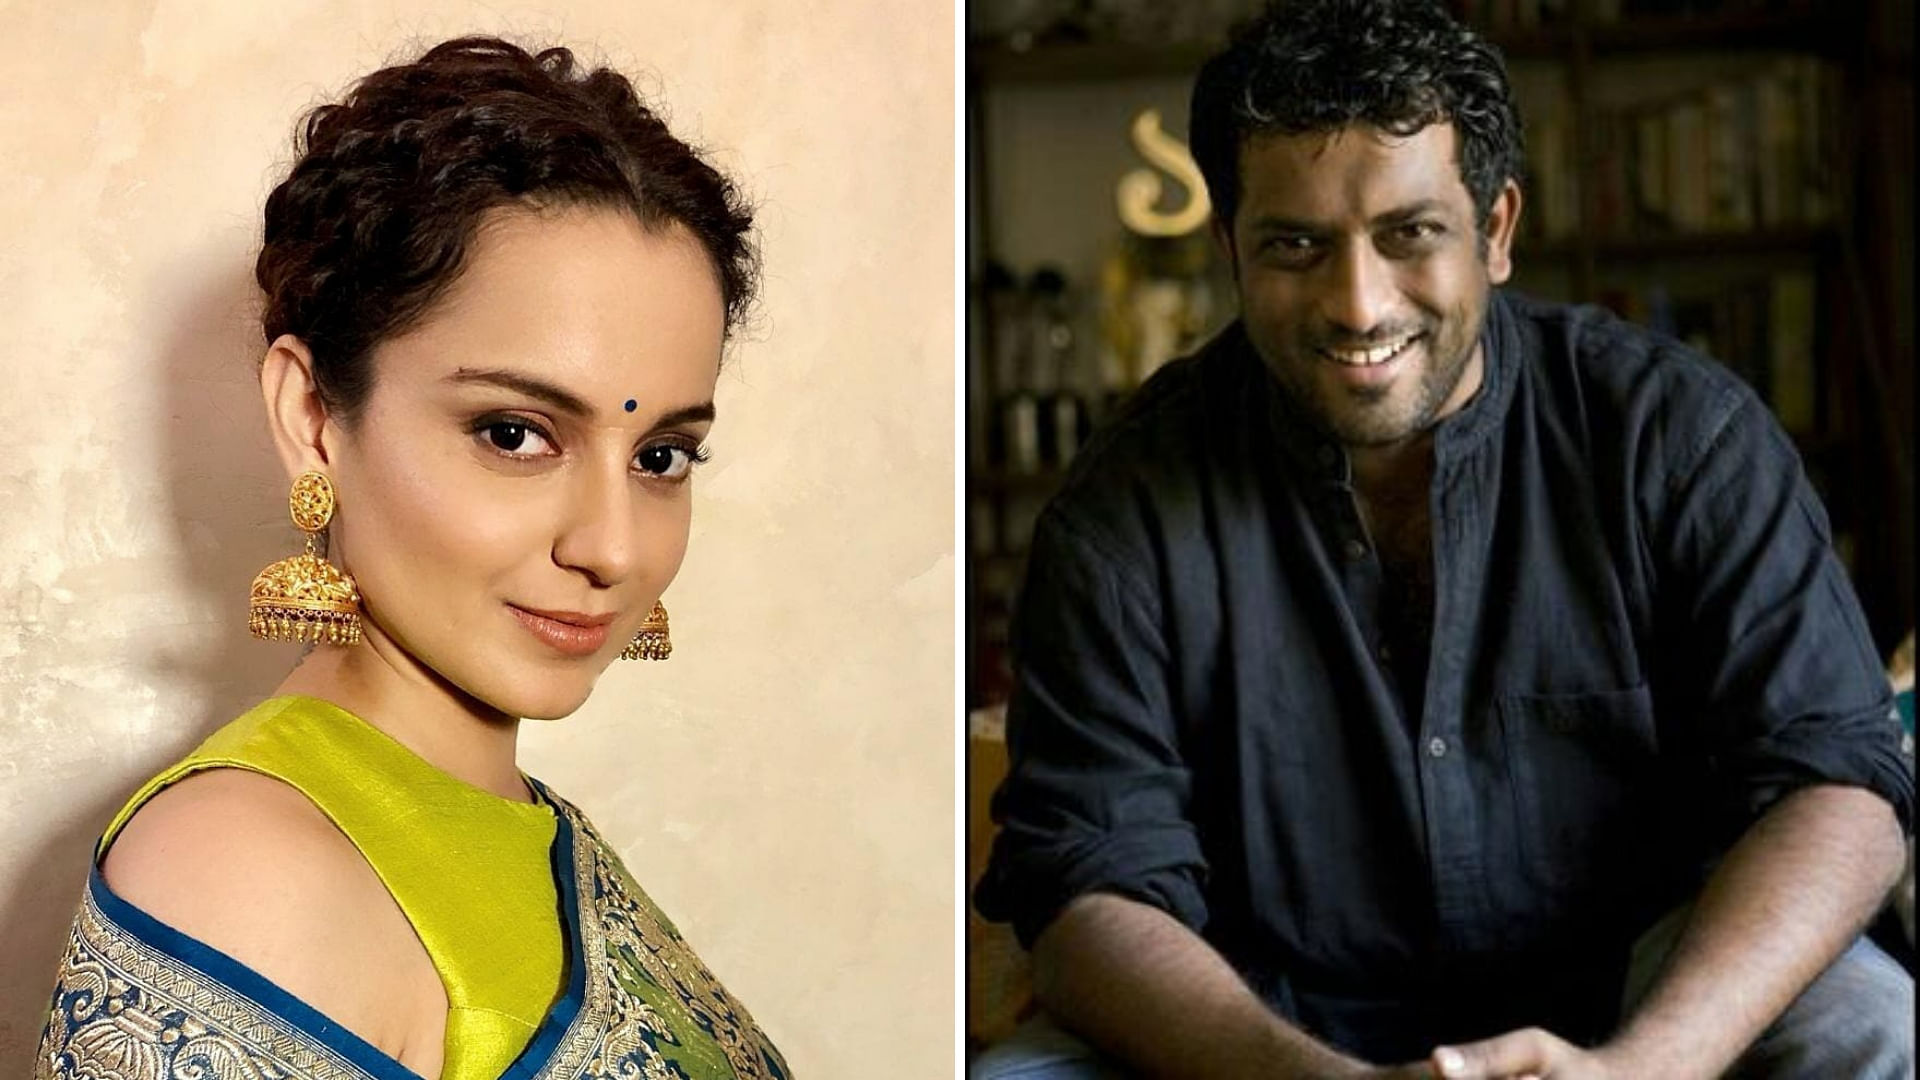 The project would have marked Kangana’s third collaboration with Basu after her debut <i>Gangster</i> and <i>Life in a Metro</i>.